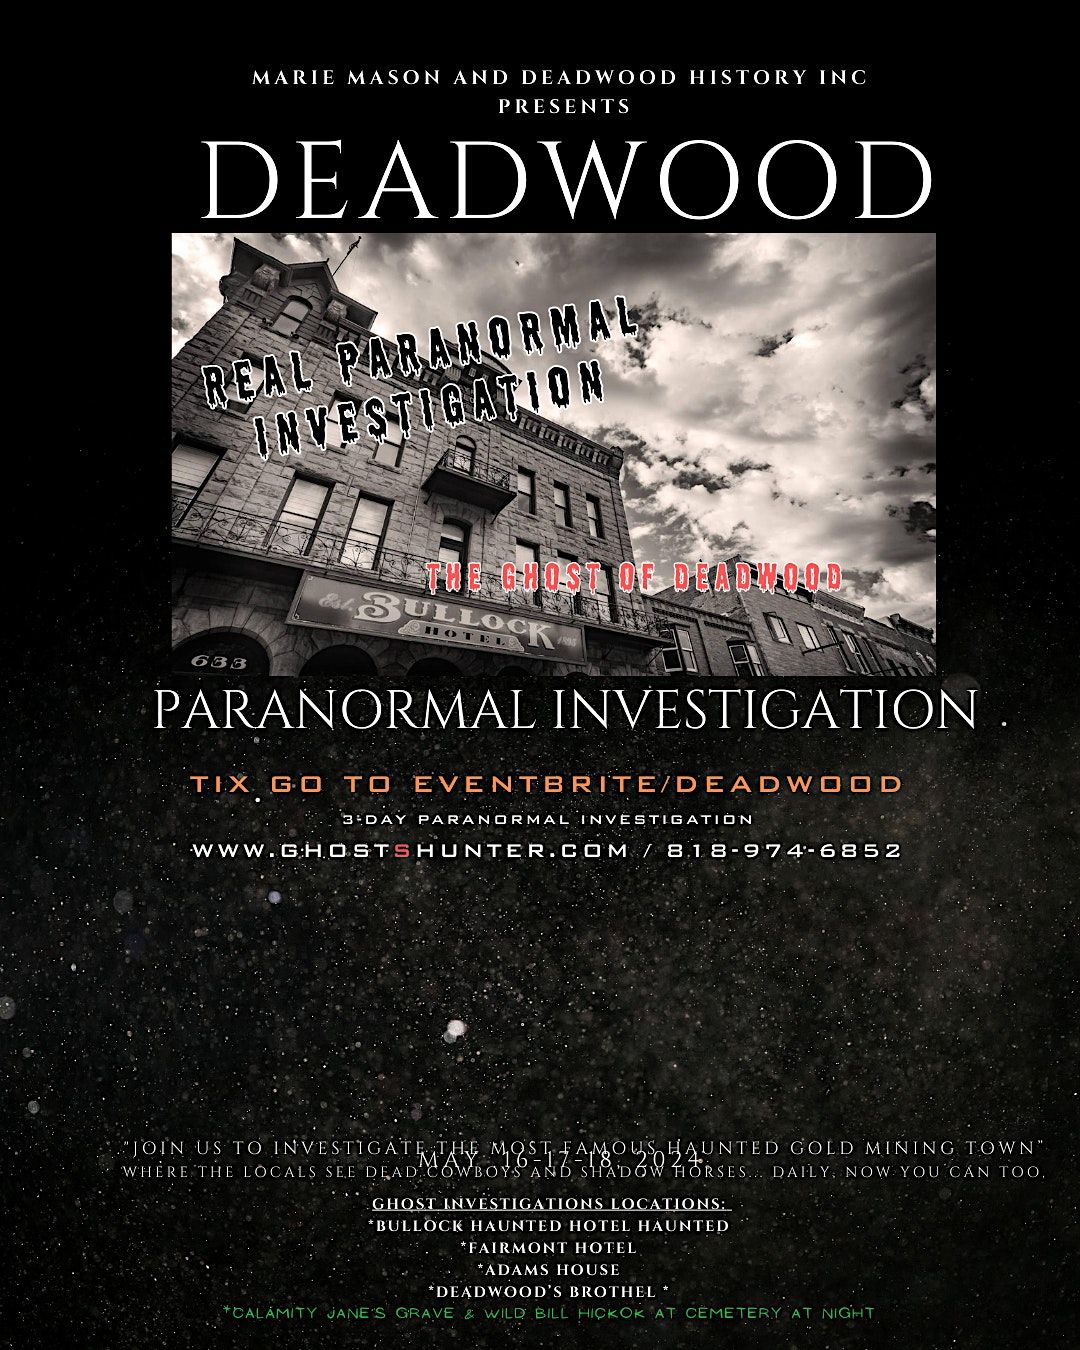 Deadwood Paranormal Investigation - Be in a Real Ghost Investigation 3-Day